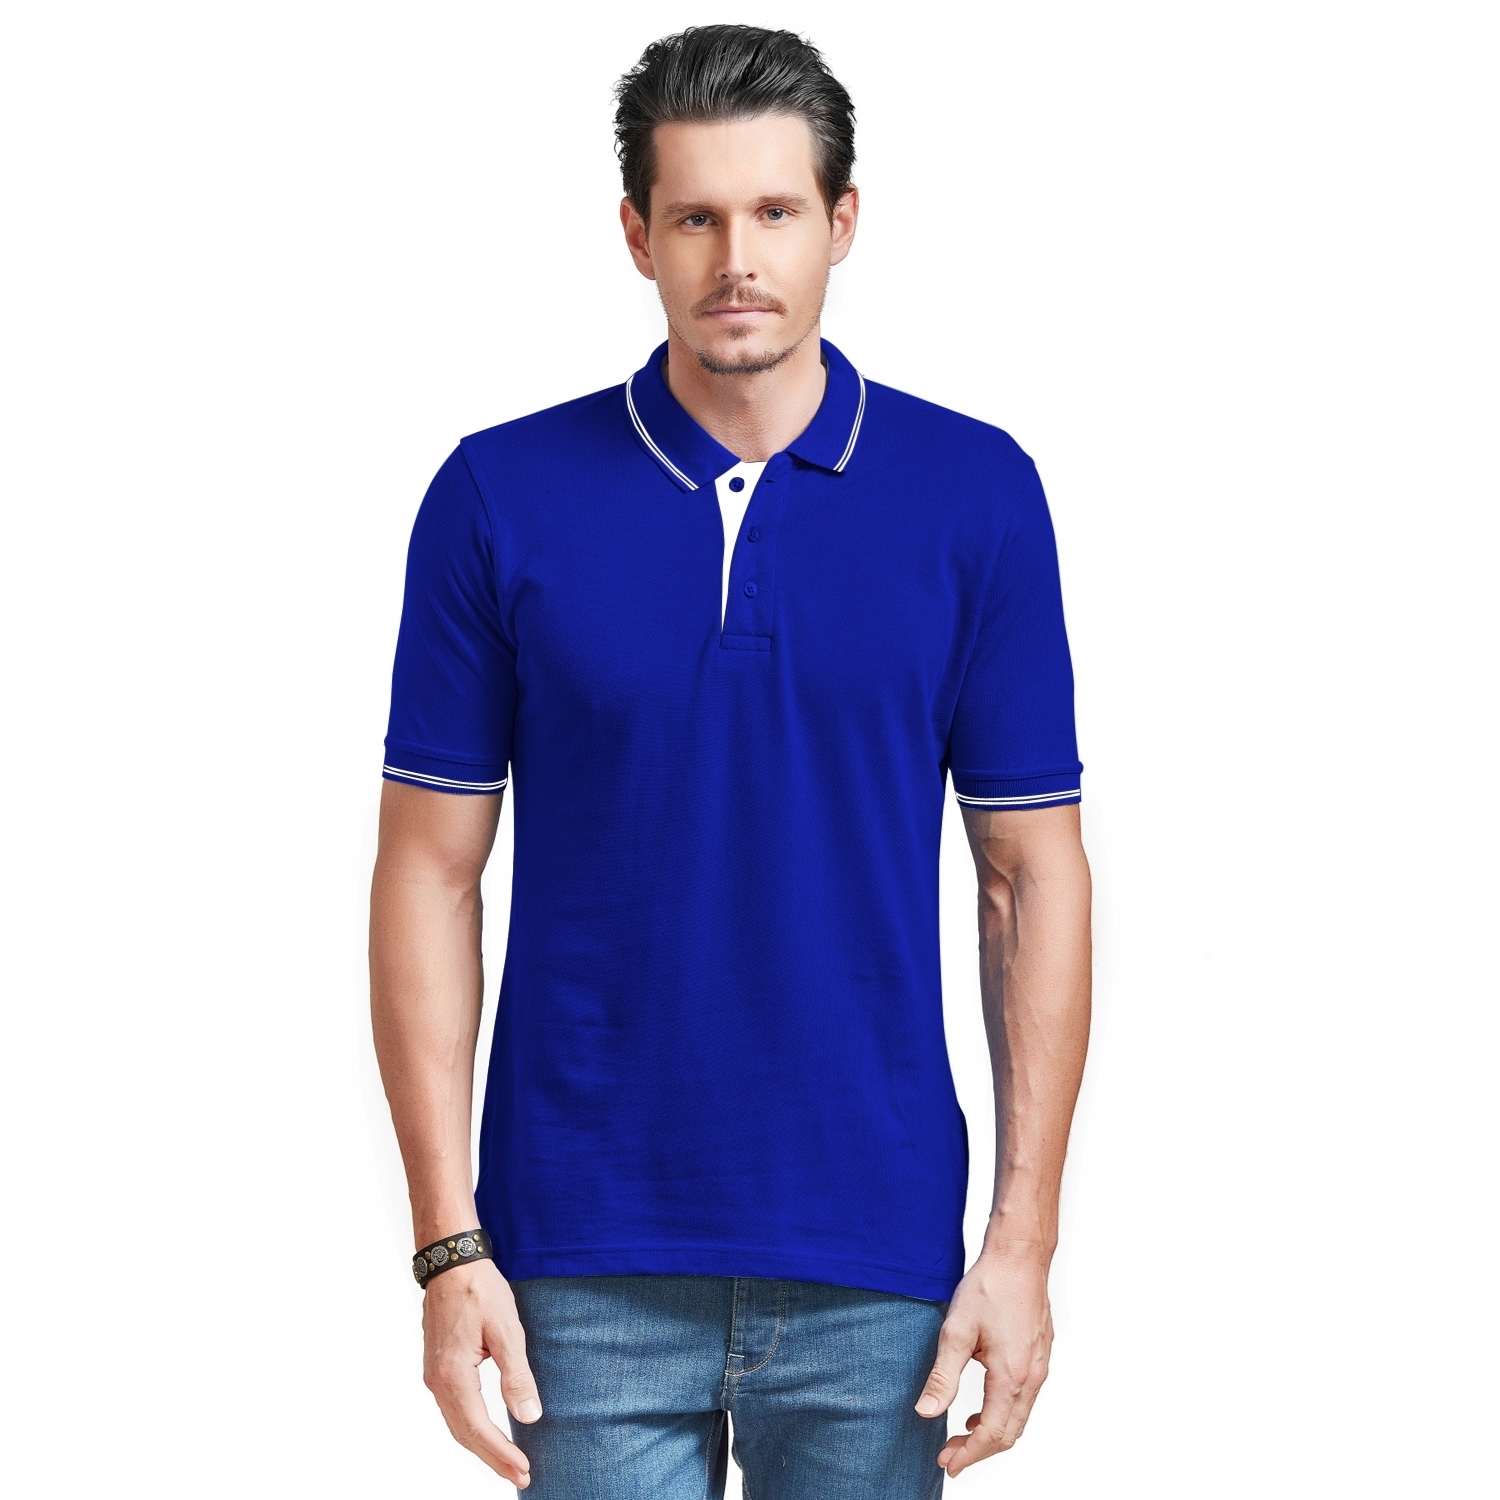 DOUBLE  F POLO NECK ROYAL BLUE T-SHIRTS WITH WHITE PLACKET